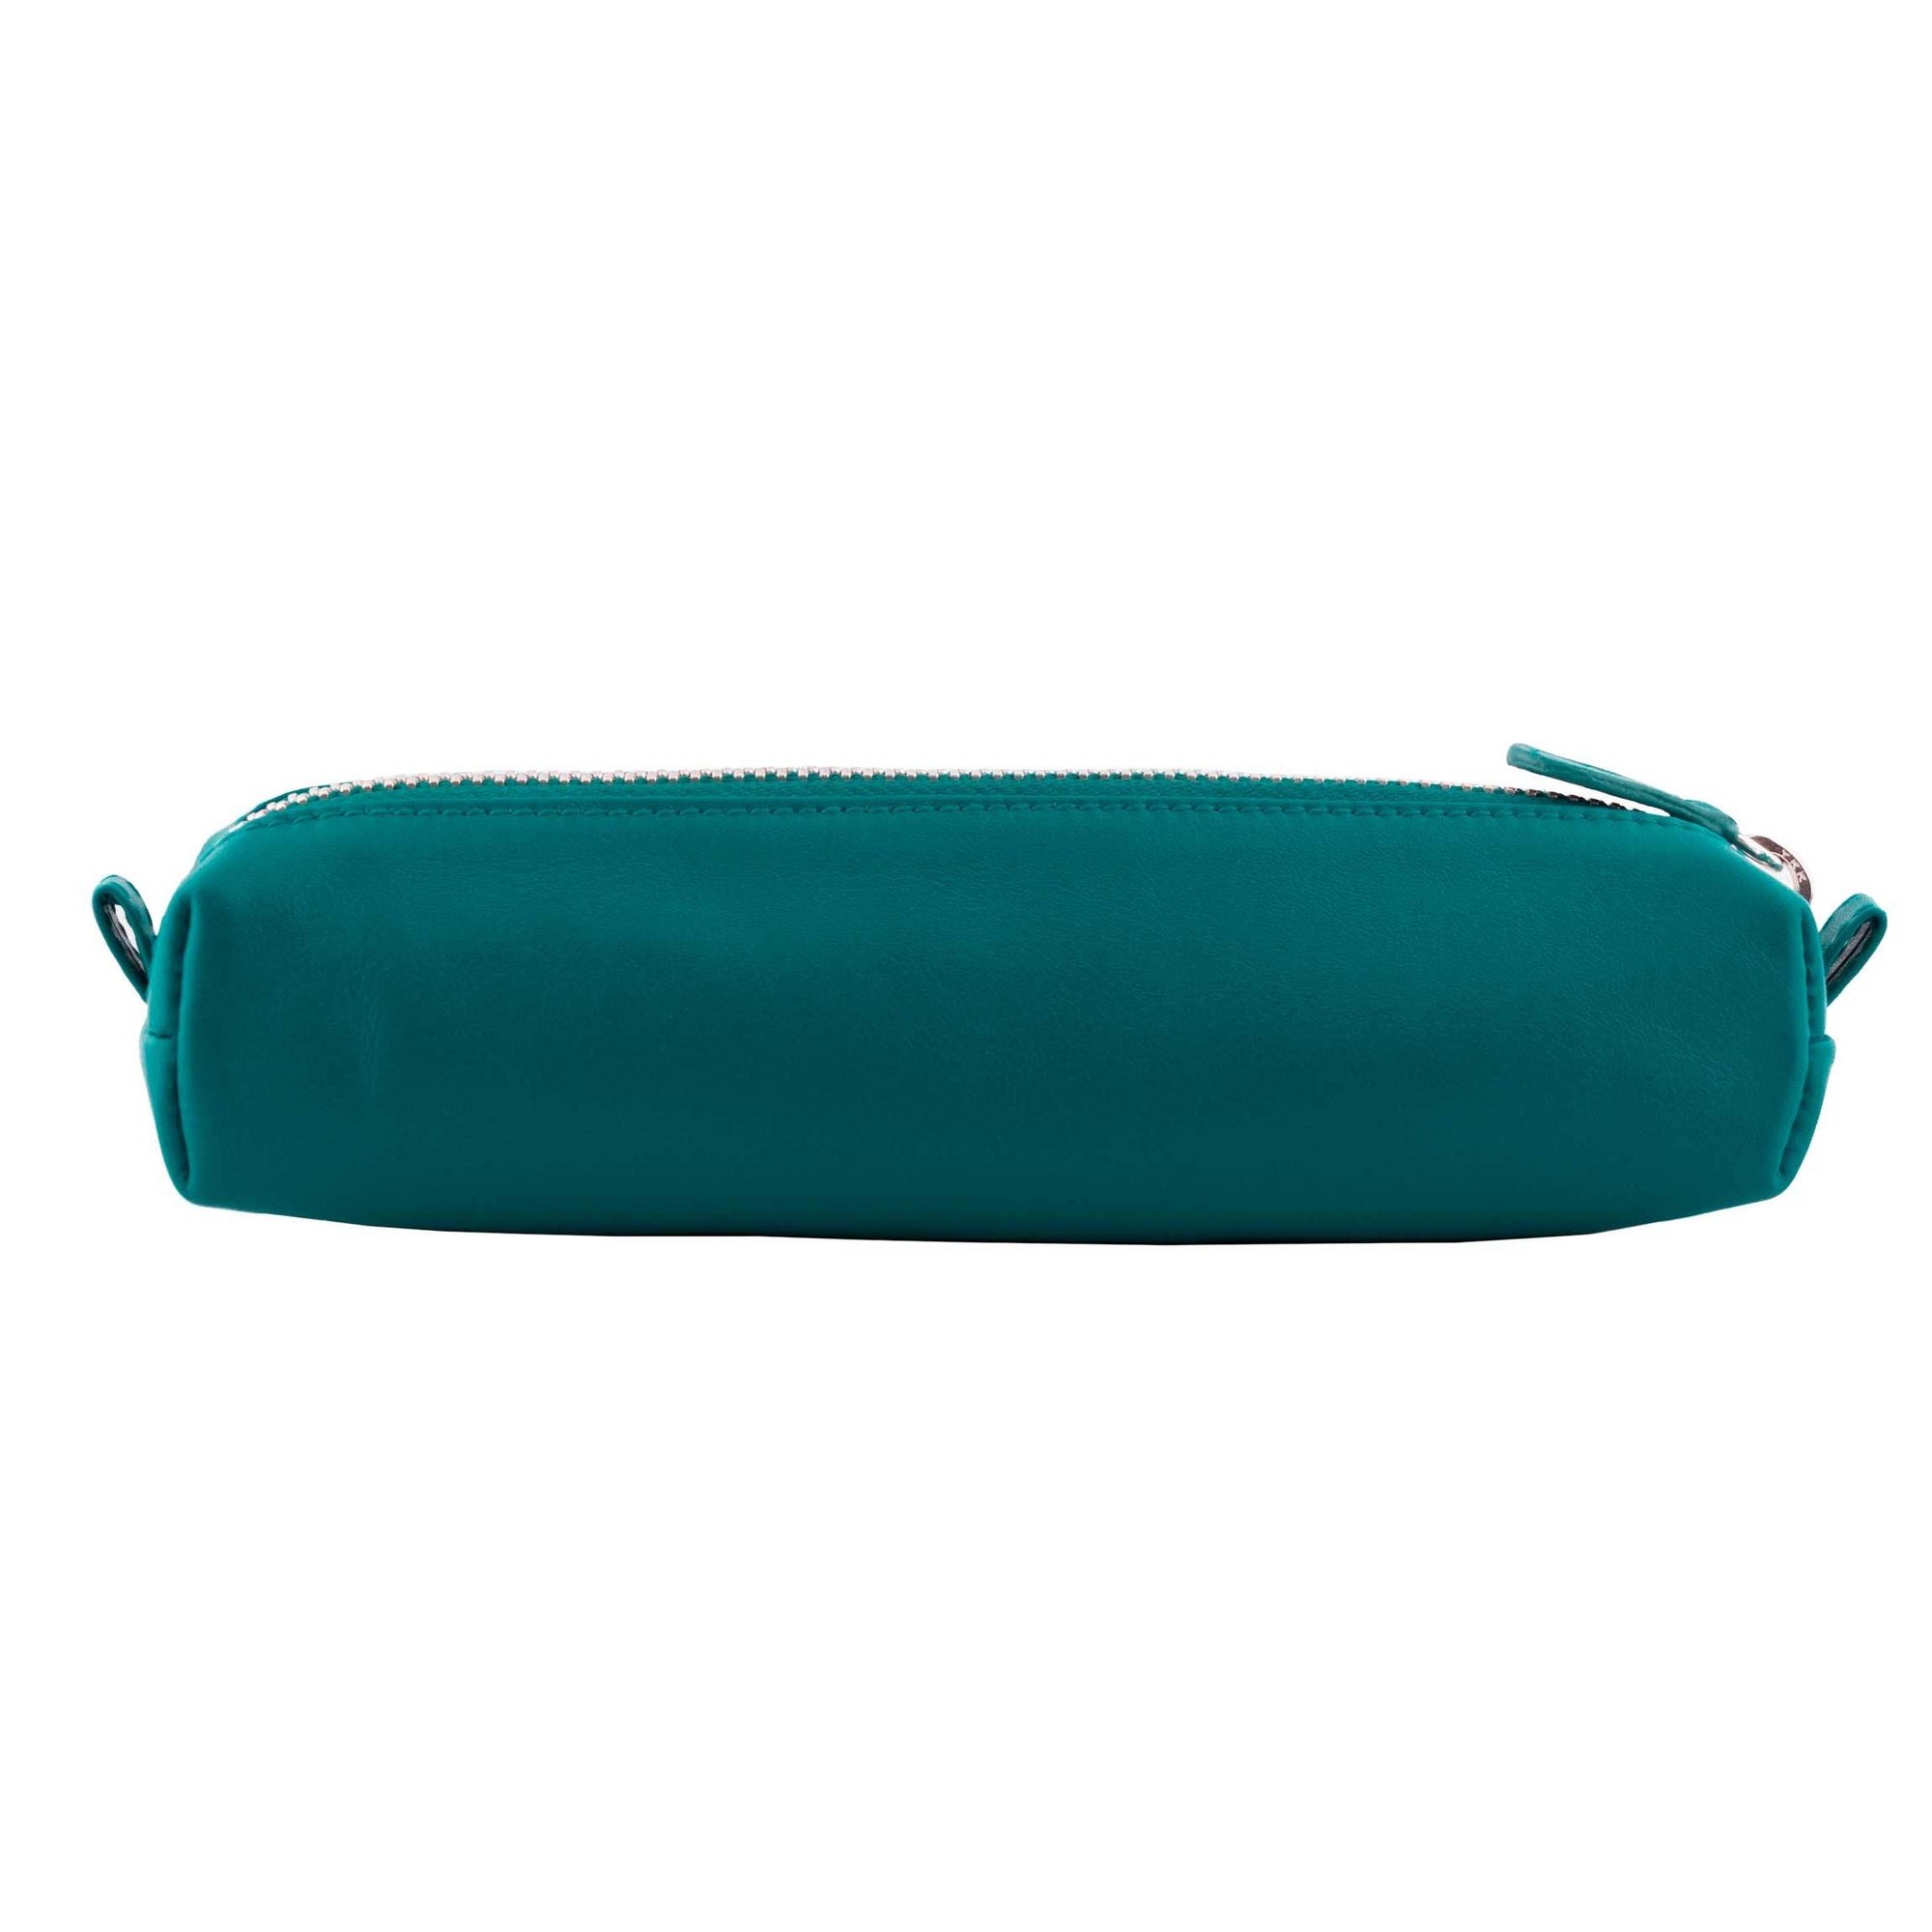 Multi-Purpose Zippered Leather Pen Pencil Case in Various Colors - Turq Green